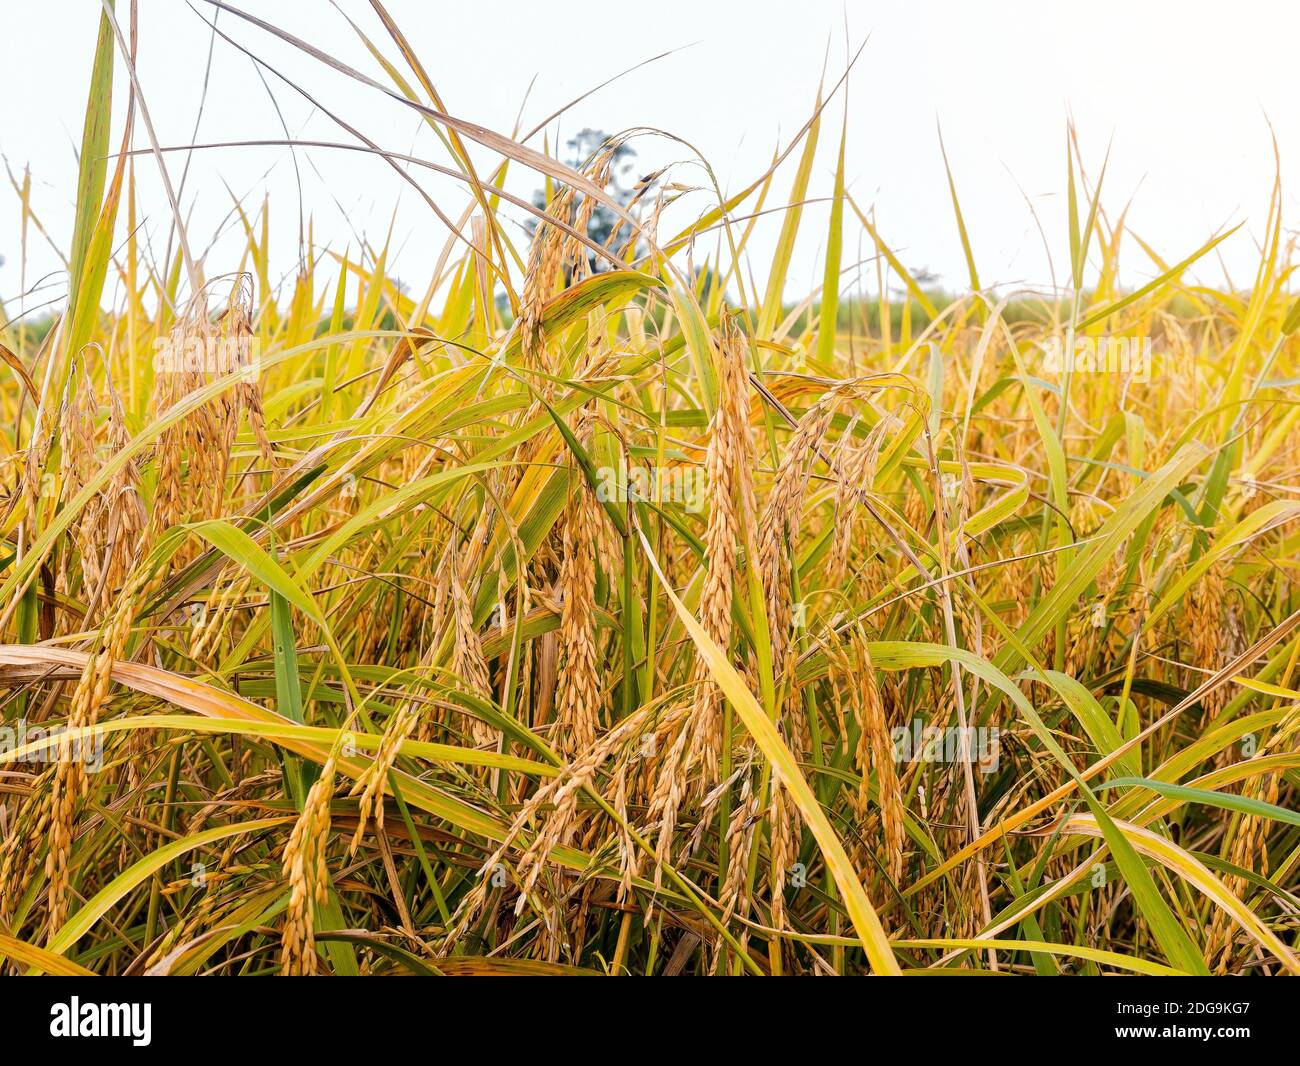 Golden yellow paddy in the fields ready for harvest Stock Photo